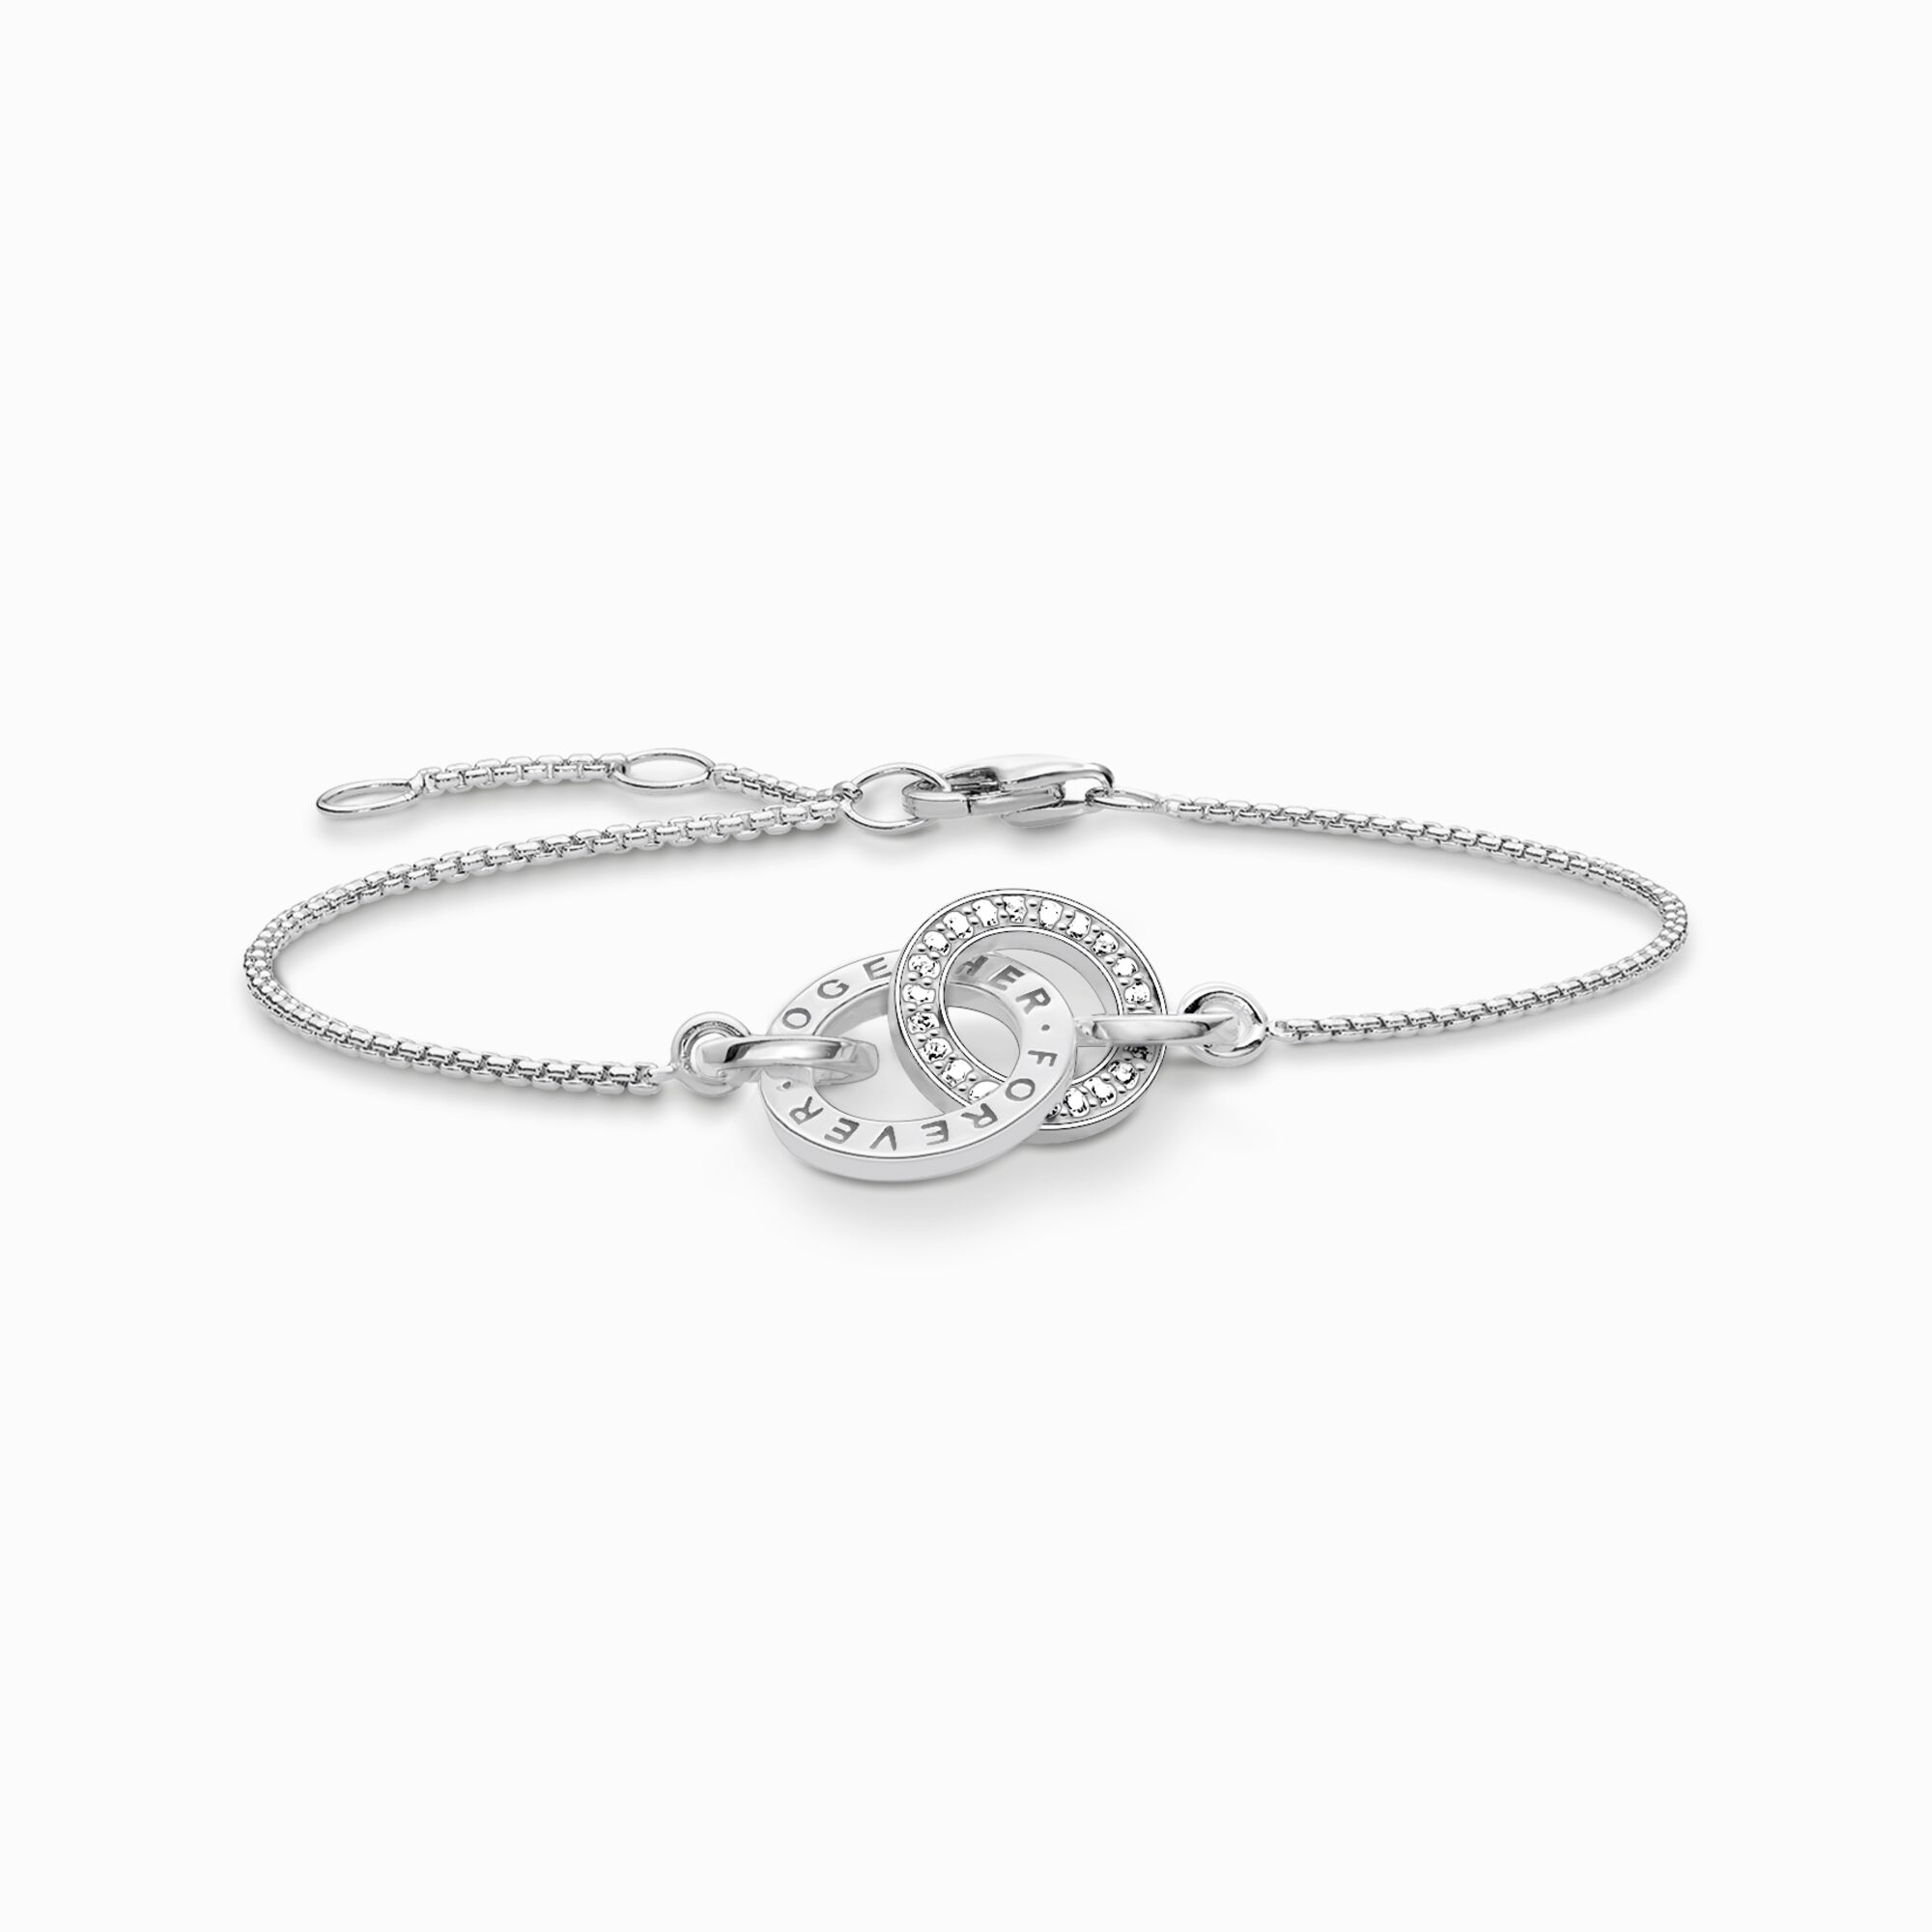 Bracelet Forever Together silver from the Glam &amp; Soul collection in the THOMAS SABO online store